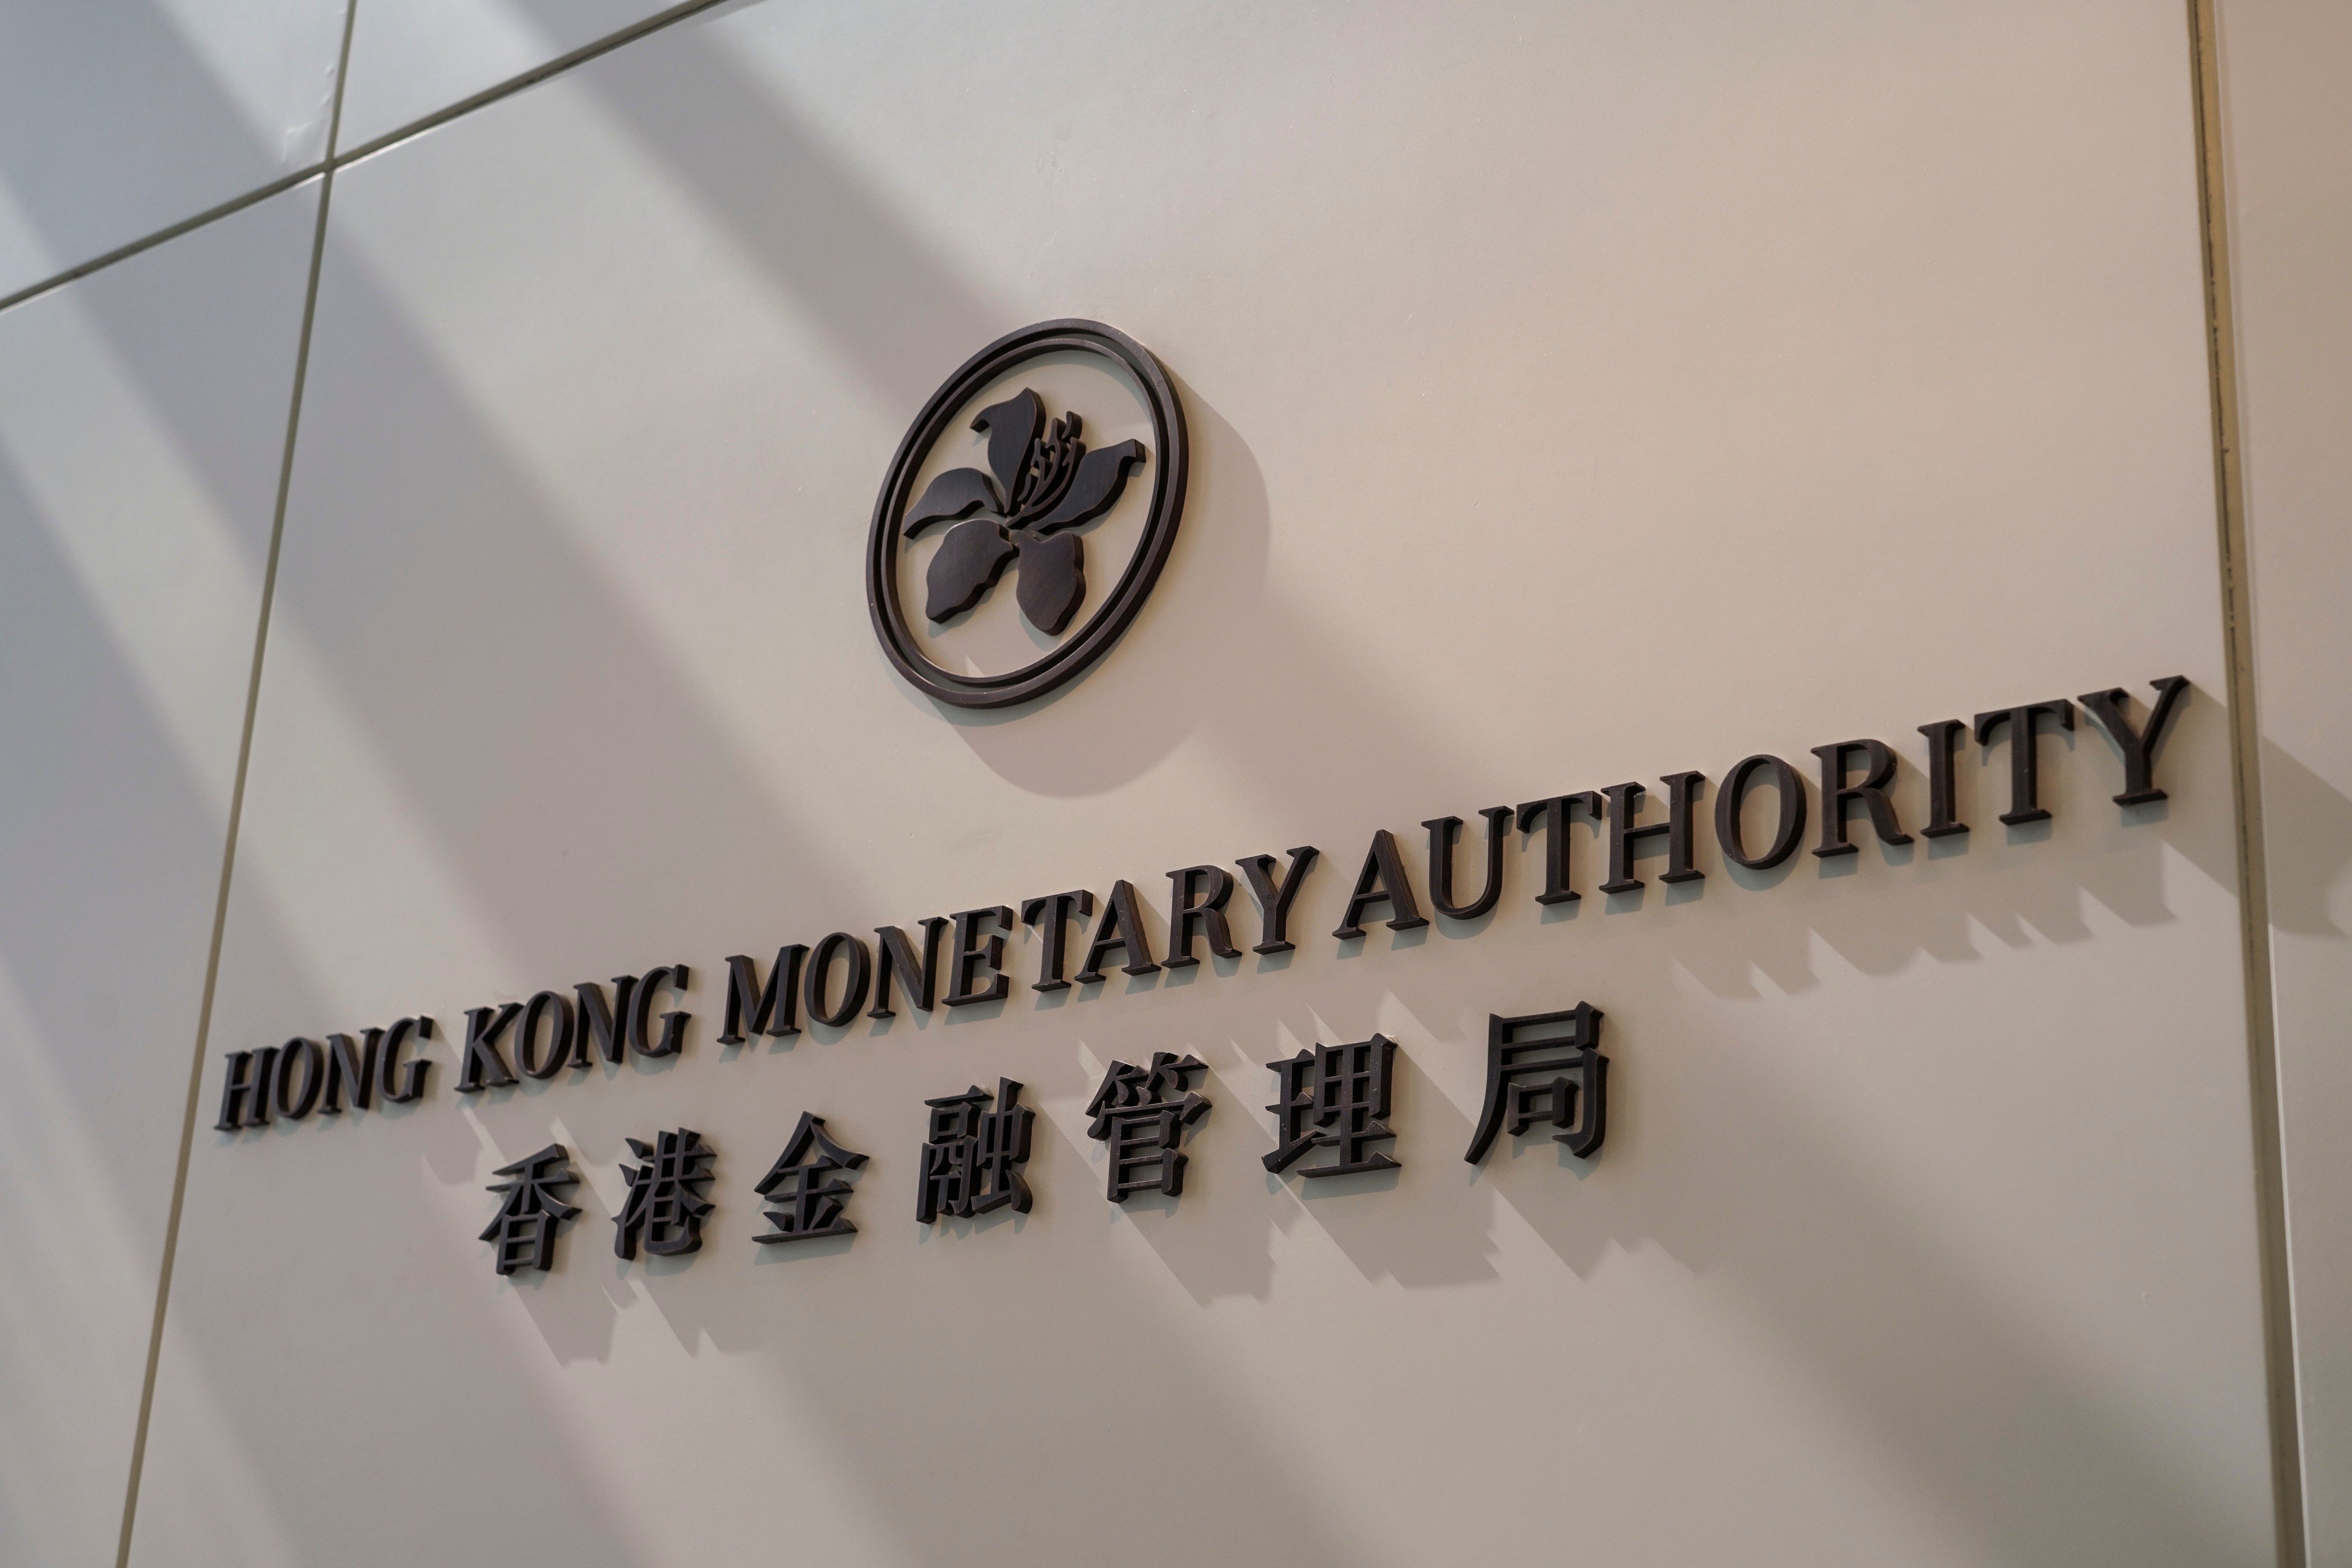 A a unified “ledger” using blockchain technology unveiled by the Hong Kong Monetary Authority will harmonise the Hong Kong dollar and integrate other assets into a shared digital infrastructure for instant payment, clearance and settlement. Photo: Shutterstock